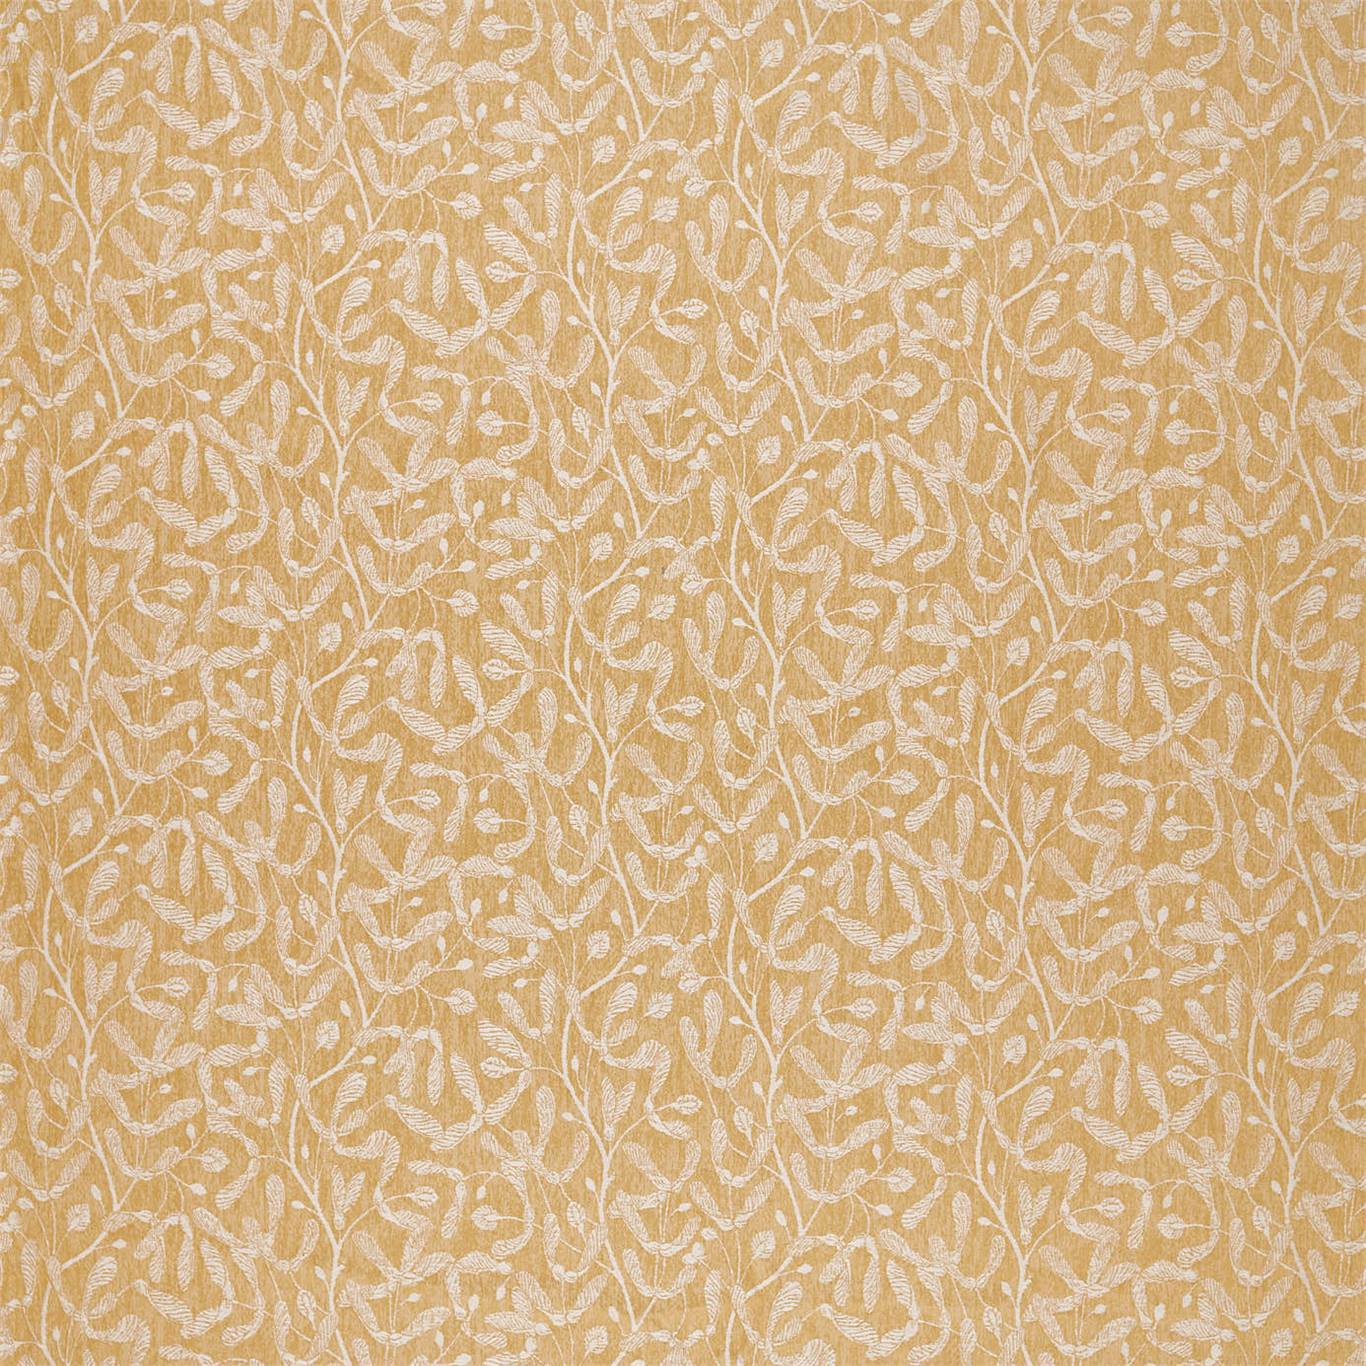 Trailing Sycamore Weave Ochre Fabric By Sanderson